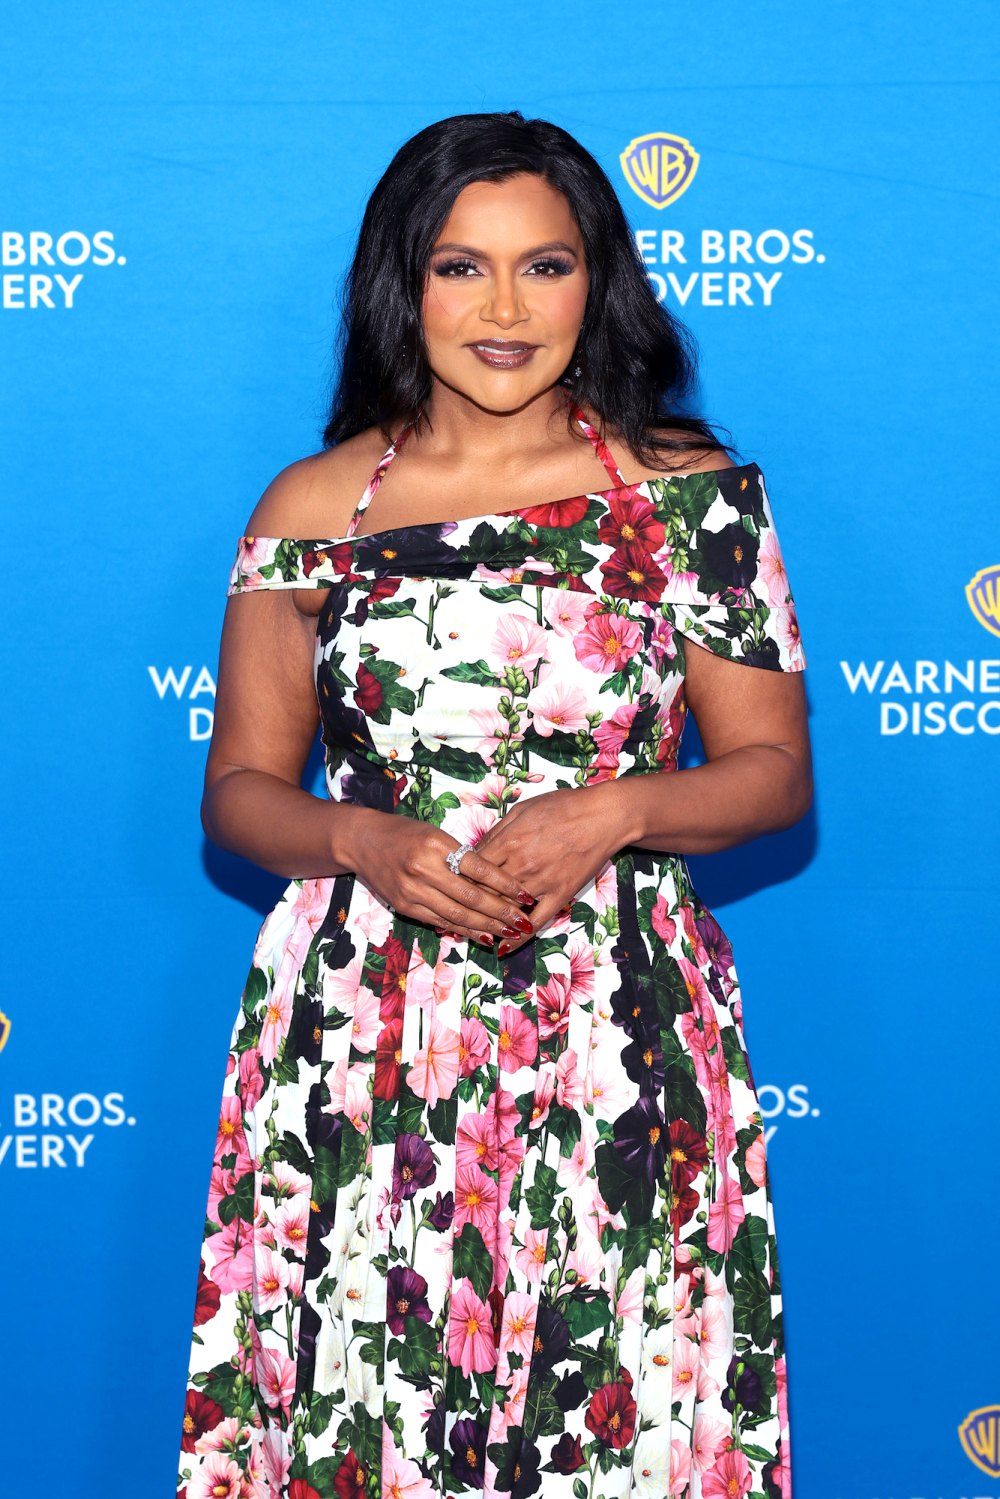 Mindy Kaling Shows Off Latest Clothing Collaboration With Andie Swim in Sporty Red Bikini